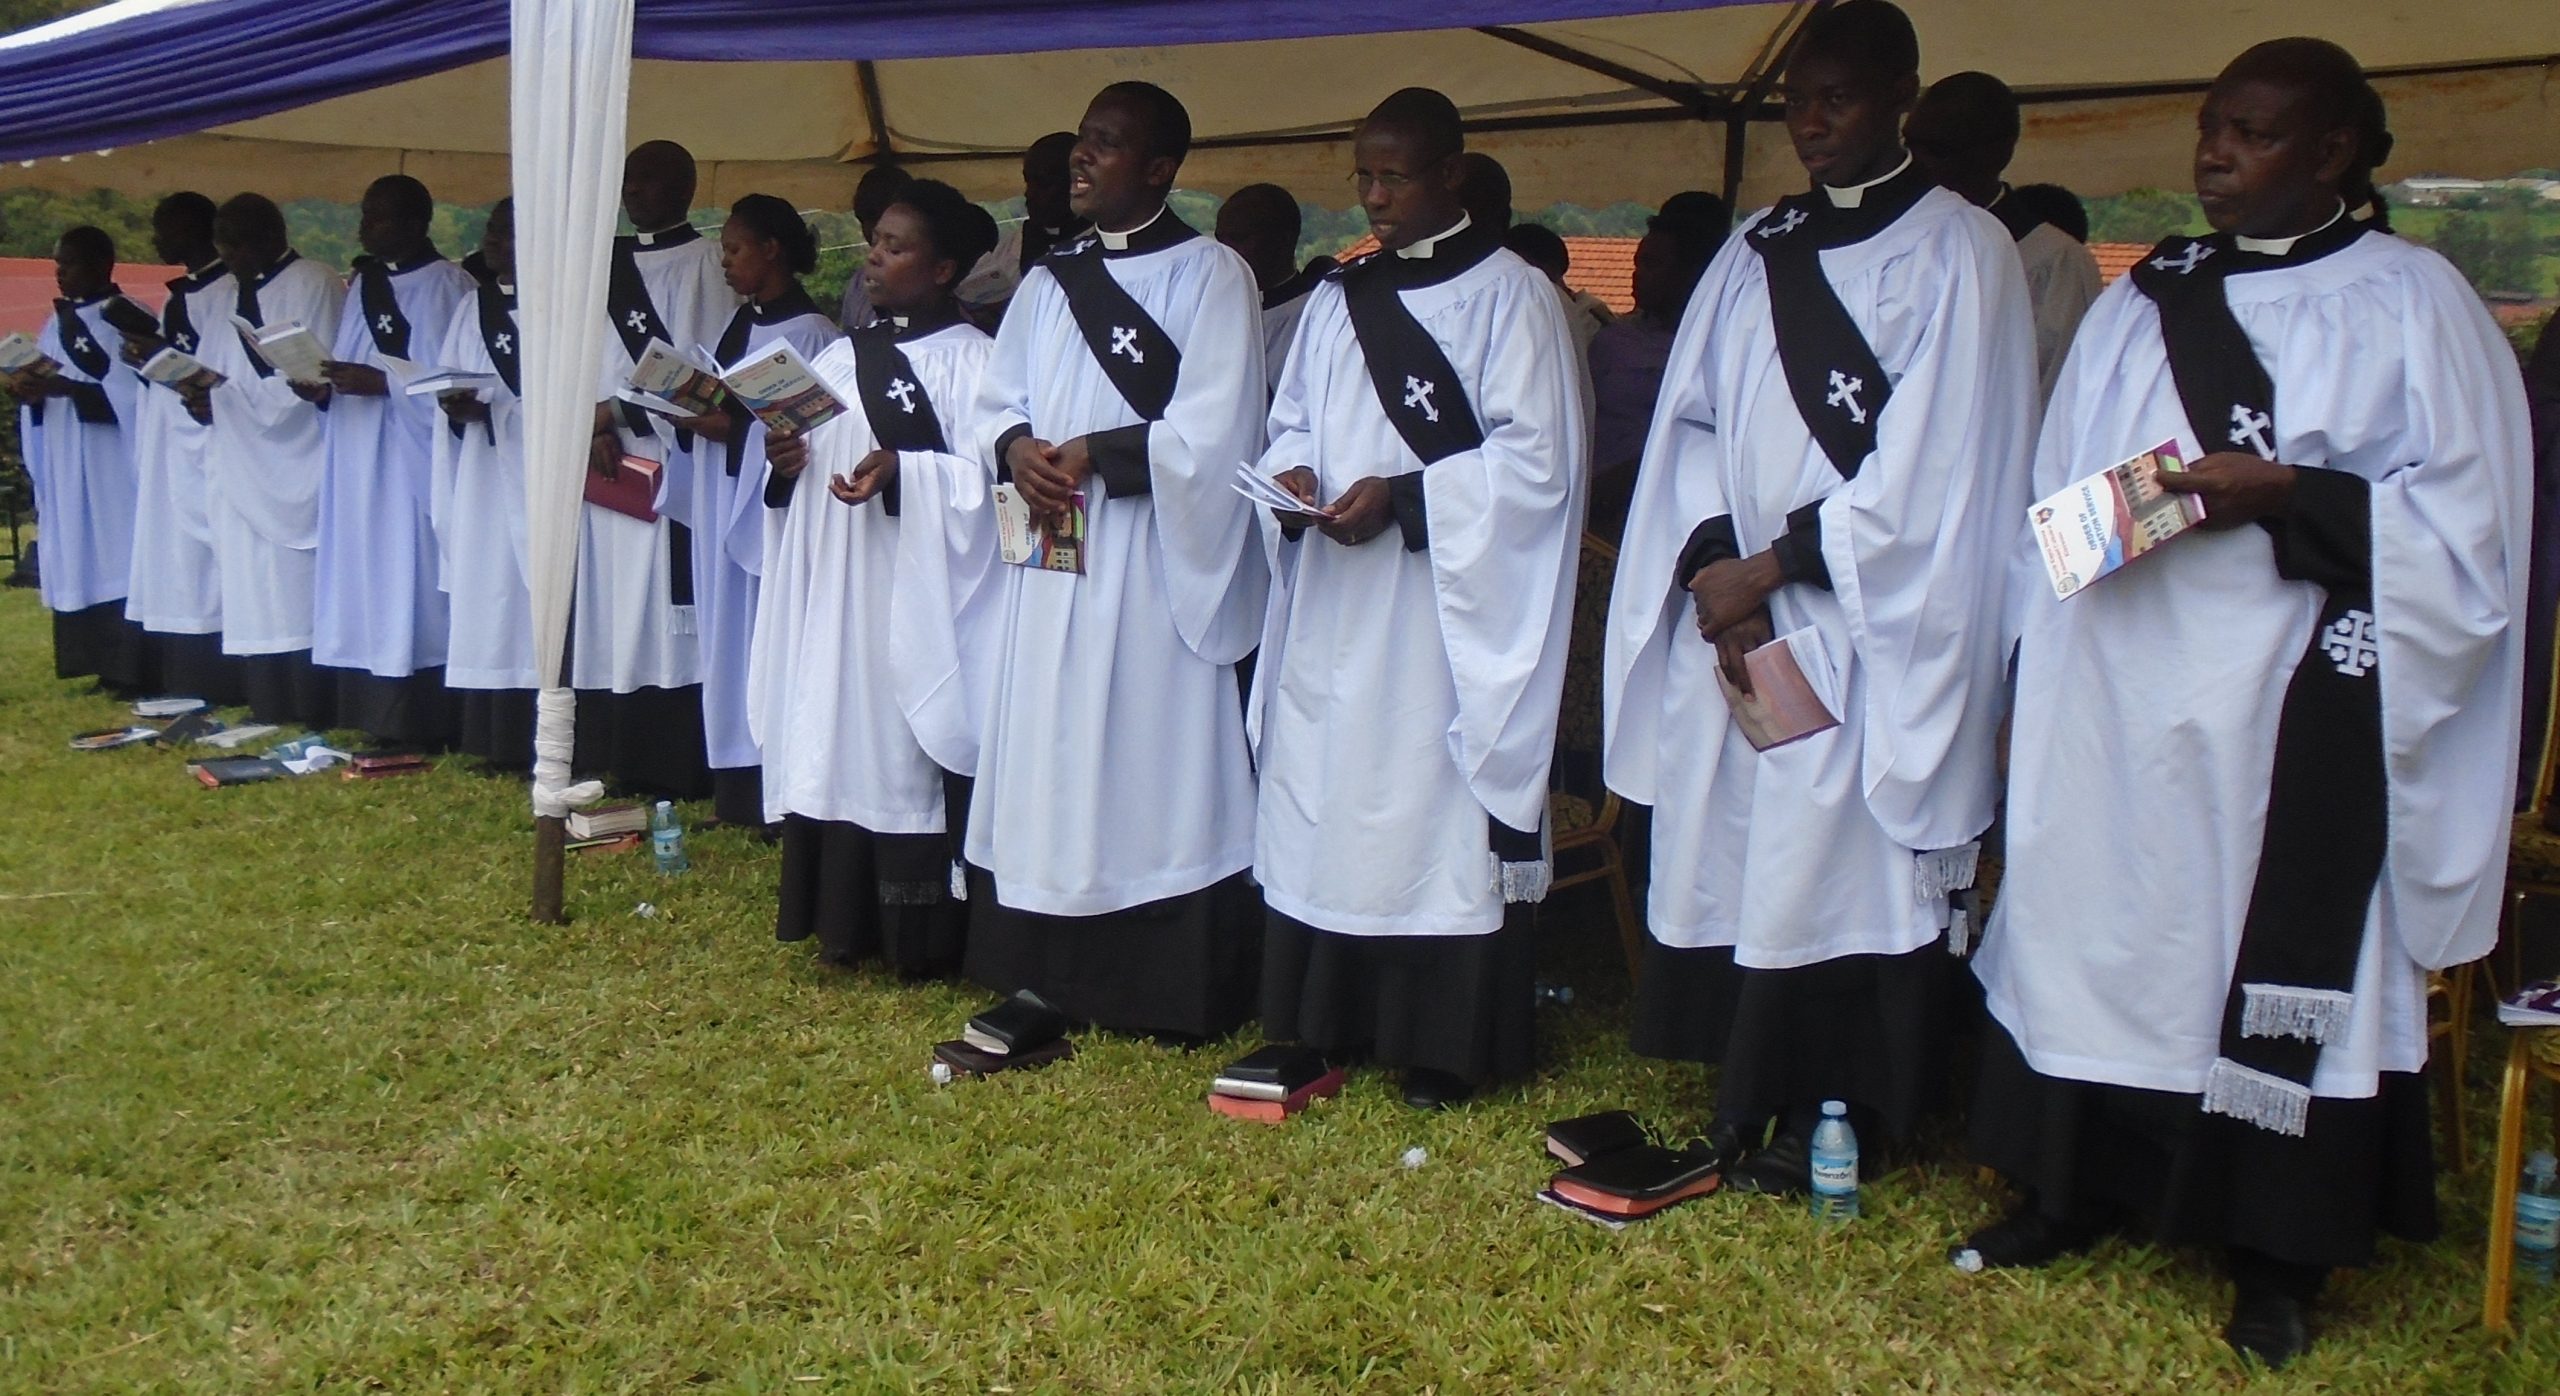 You are currently viewing 9 Ordained as Priests while other 9 ordered as Deacons